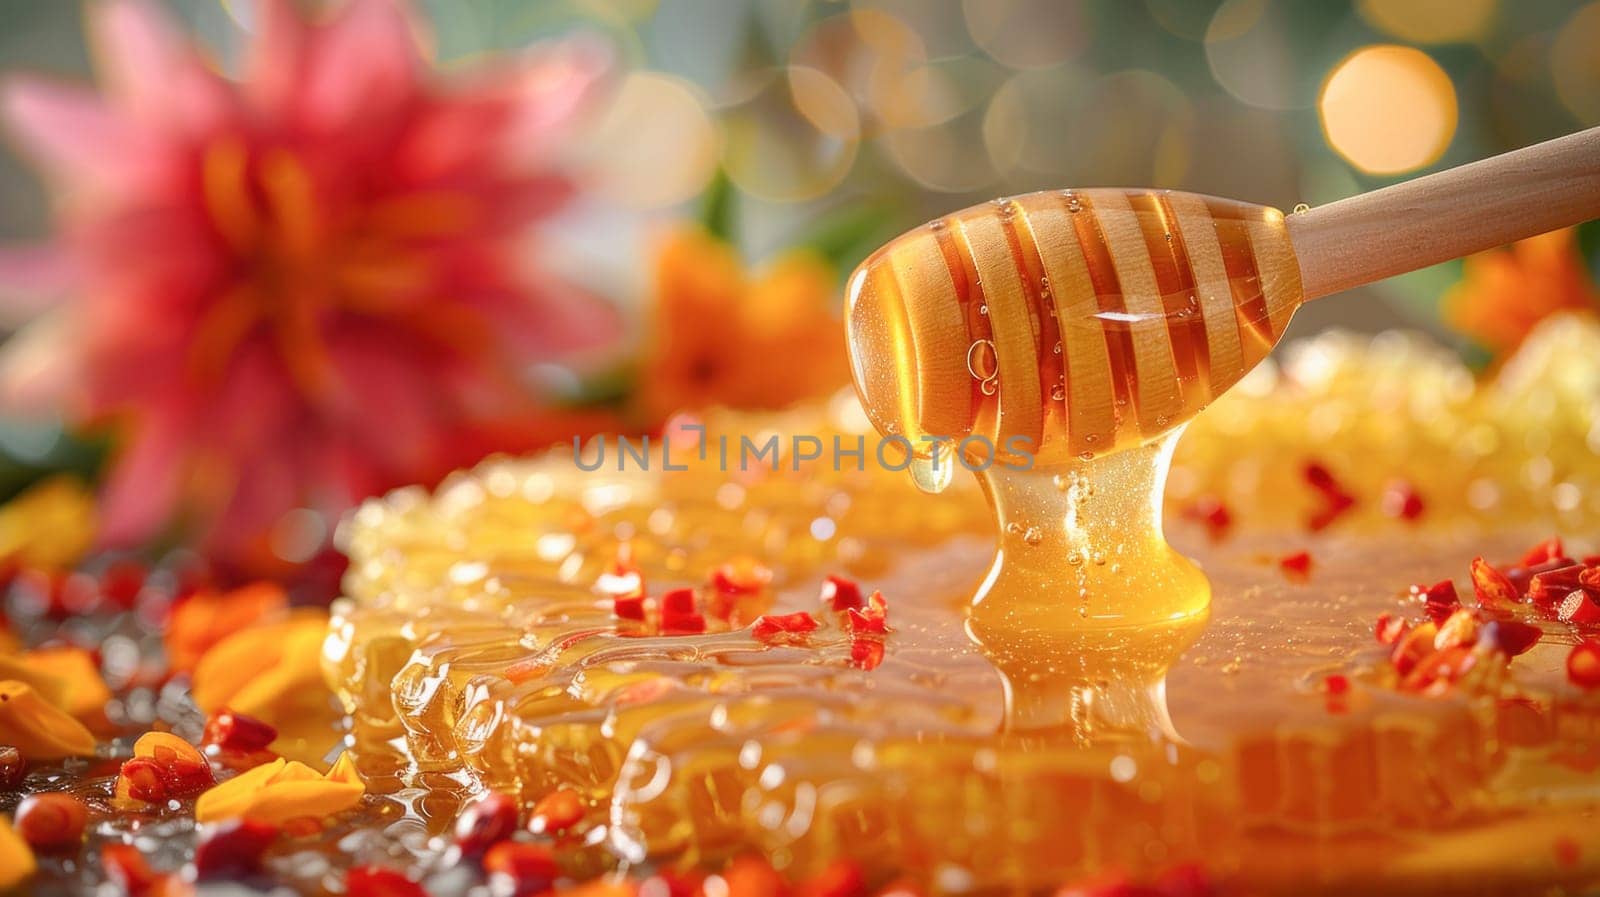 A honey dipper adding honey to a honeycomb perfectly captures this sweet moment with beauty and elegance